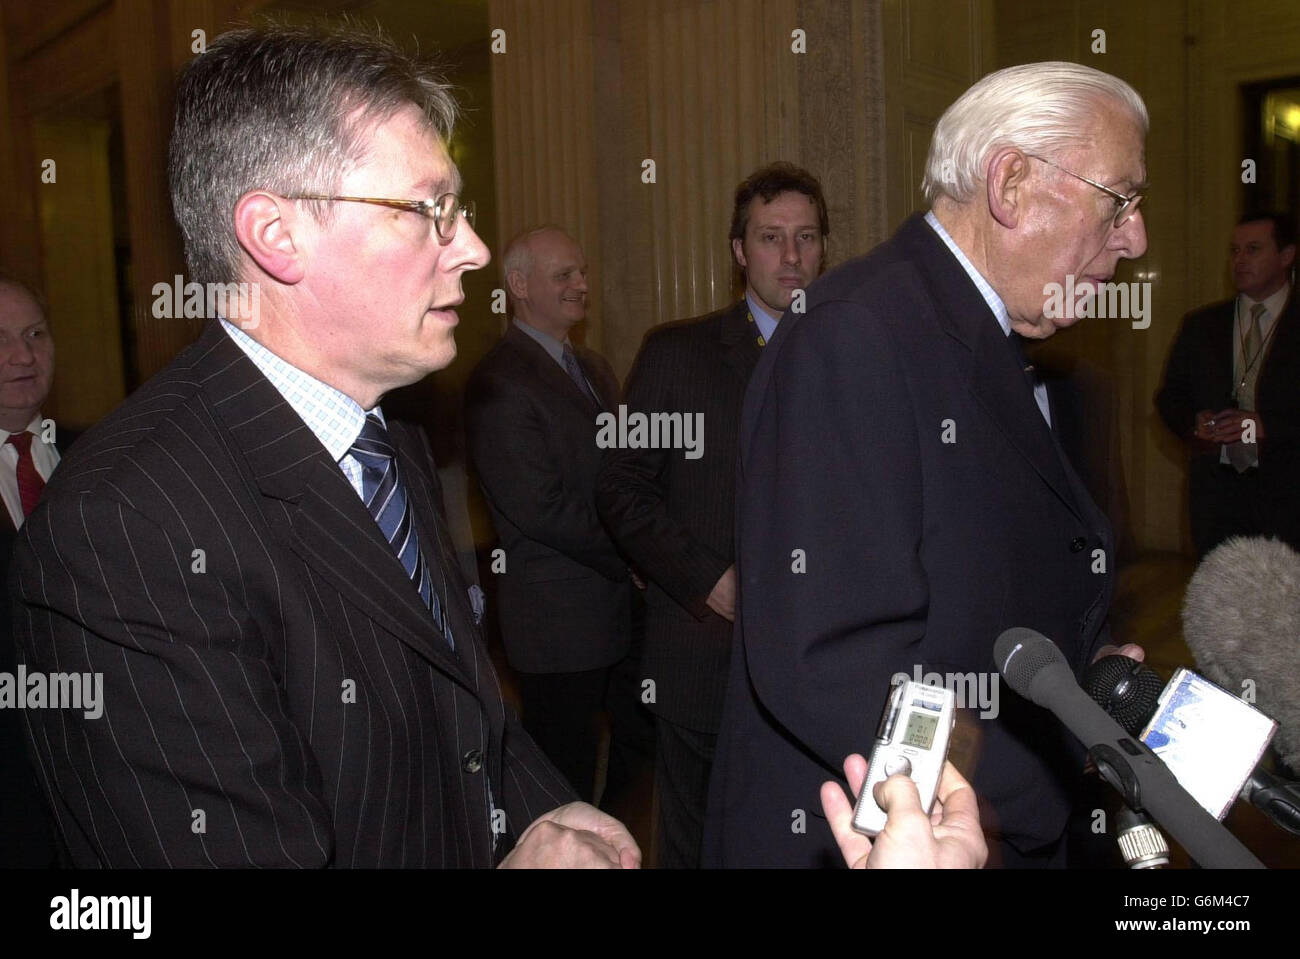 Democratic Unionist leader, Ian Paisley (right) and deputy leader, Peter Robinson, speaking to journalists before a party meeting with the Secretary of State for Northern Ireland, Paul Murphy. Robinson, whose party emerged the largest grouping in the Assembly after last Wednesday's election, queried whether the Government would be willing to force MLAs to go to the polls again in the event of a political stalemate. Stock Photo